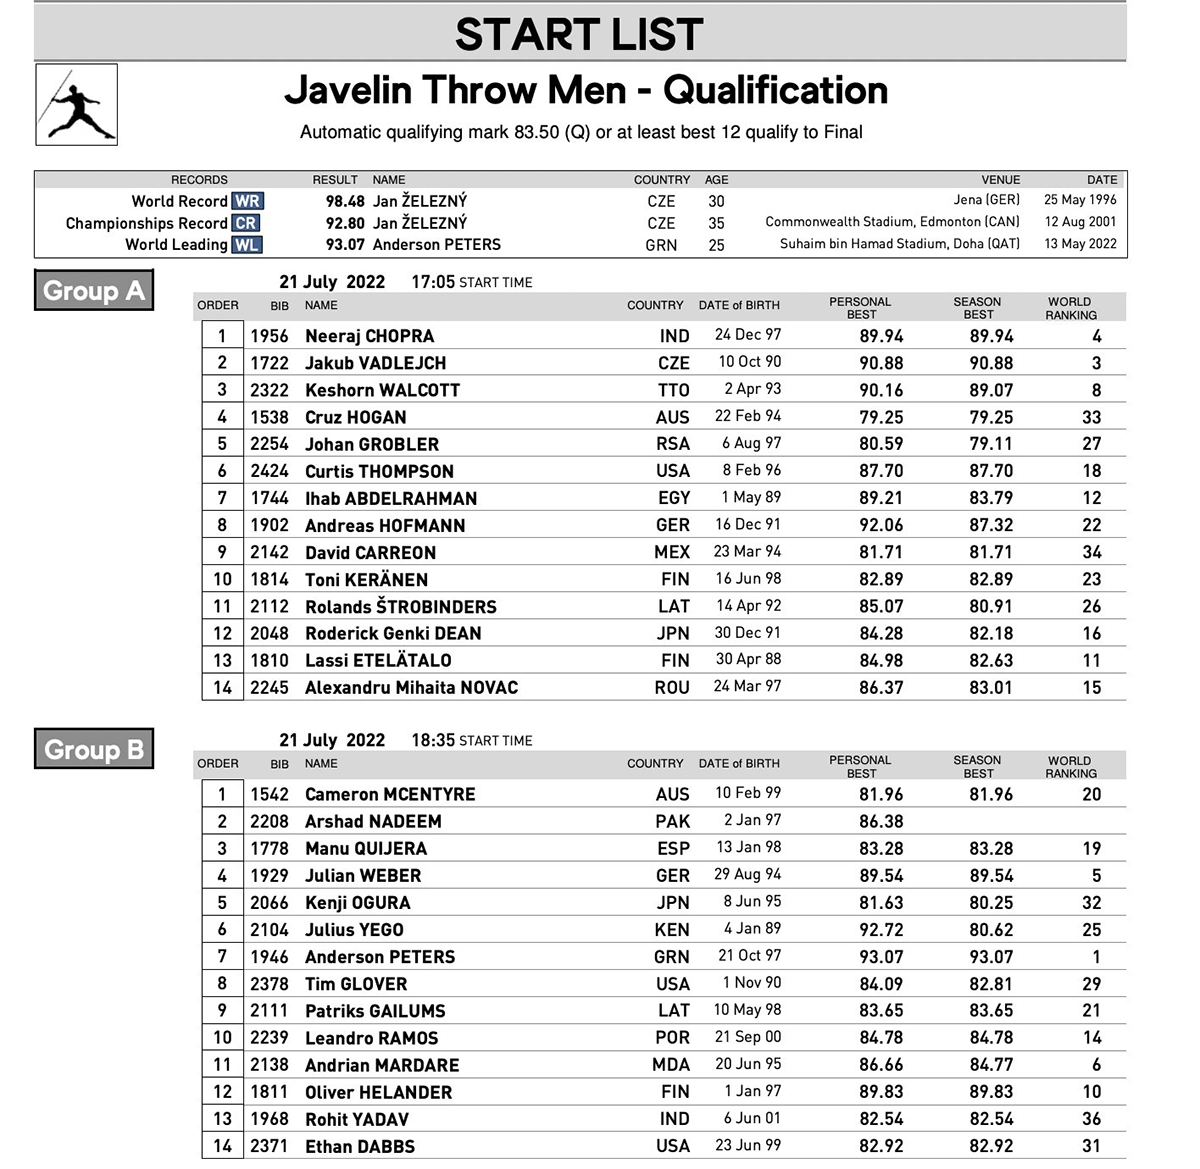 The list of javelin throwers for qualification